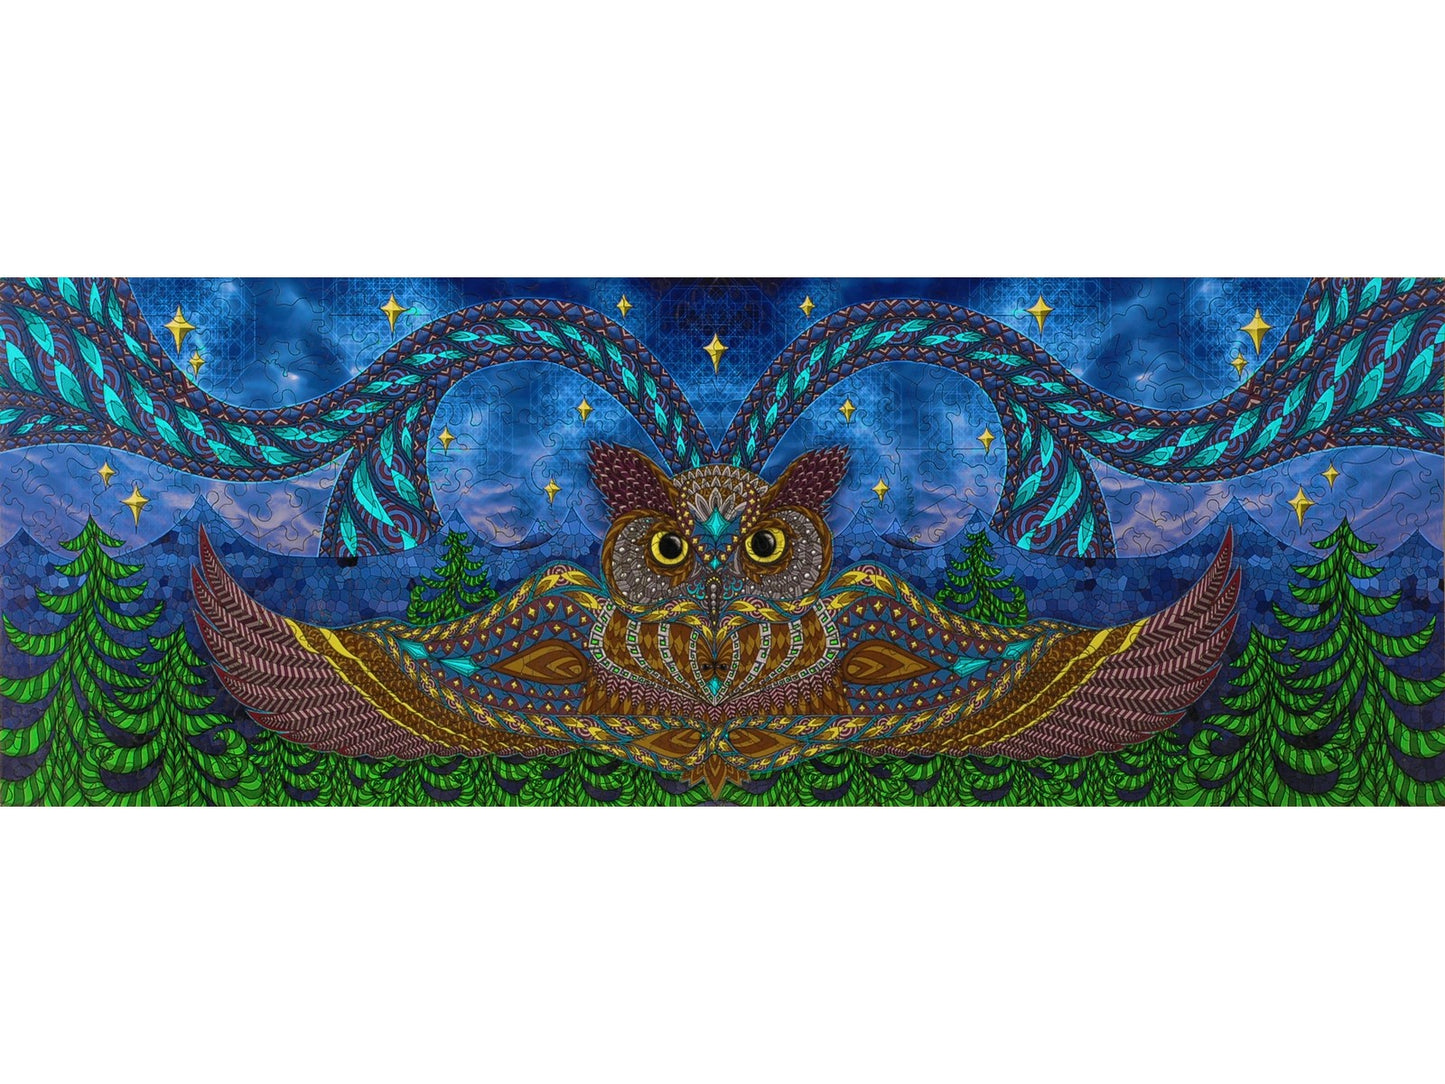 The front of the puzzle, Owl Eyes, which shows a colorful night scene with a great horned owl.